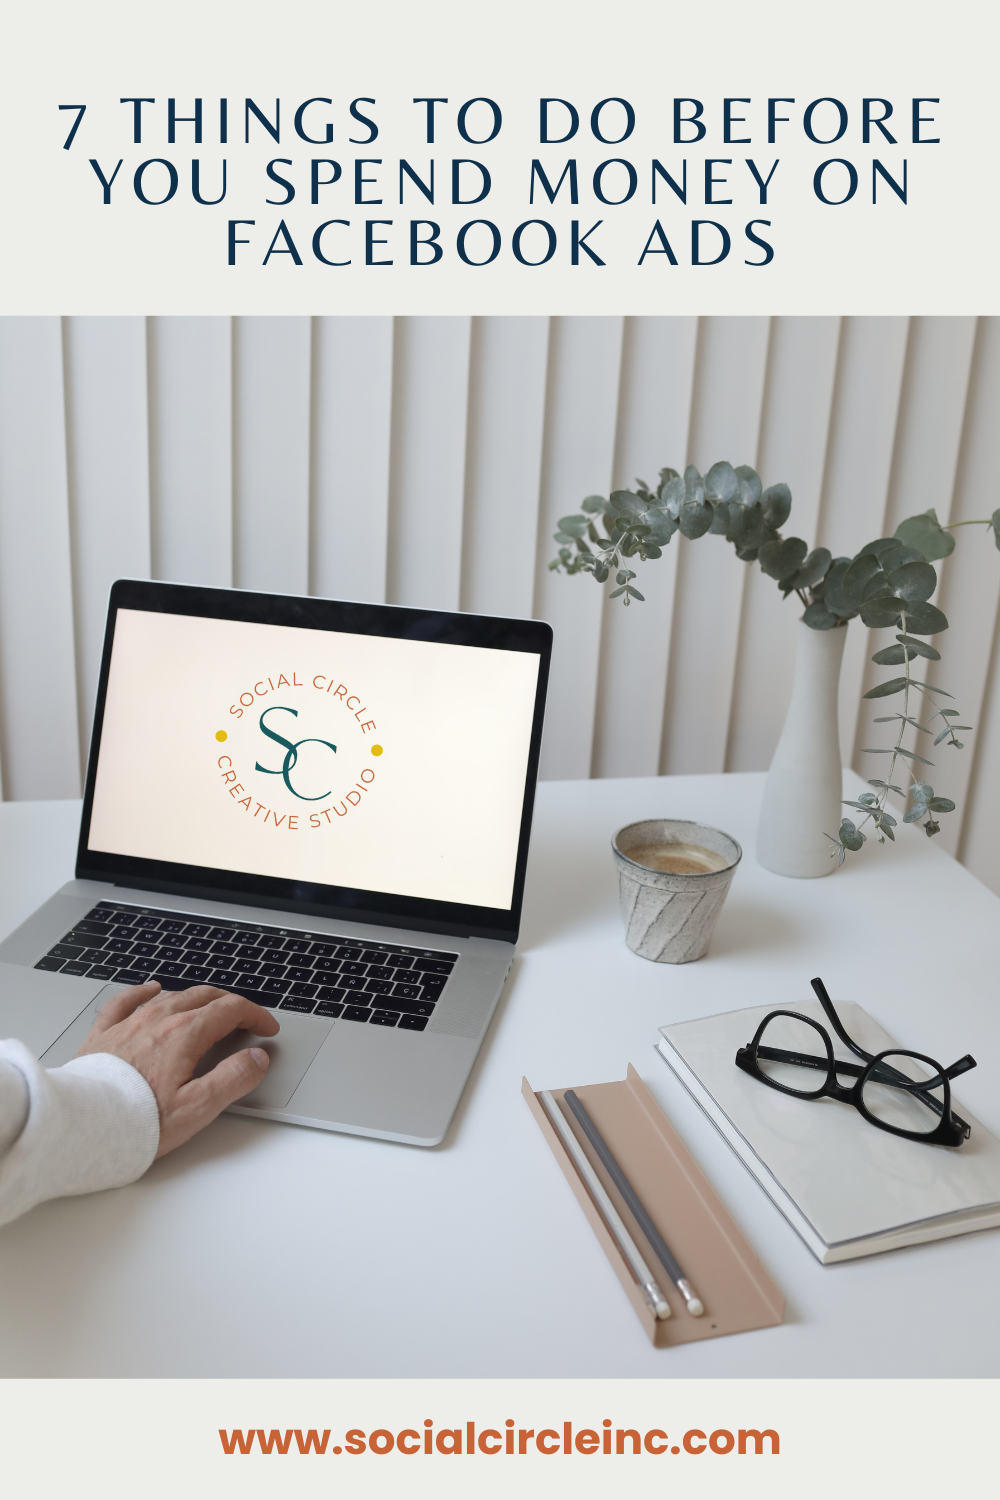 7 Things to Do Before You Spend Money on Facebook Ads